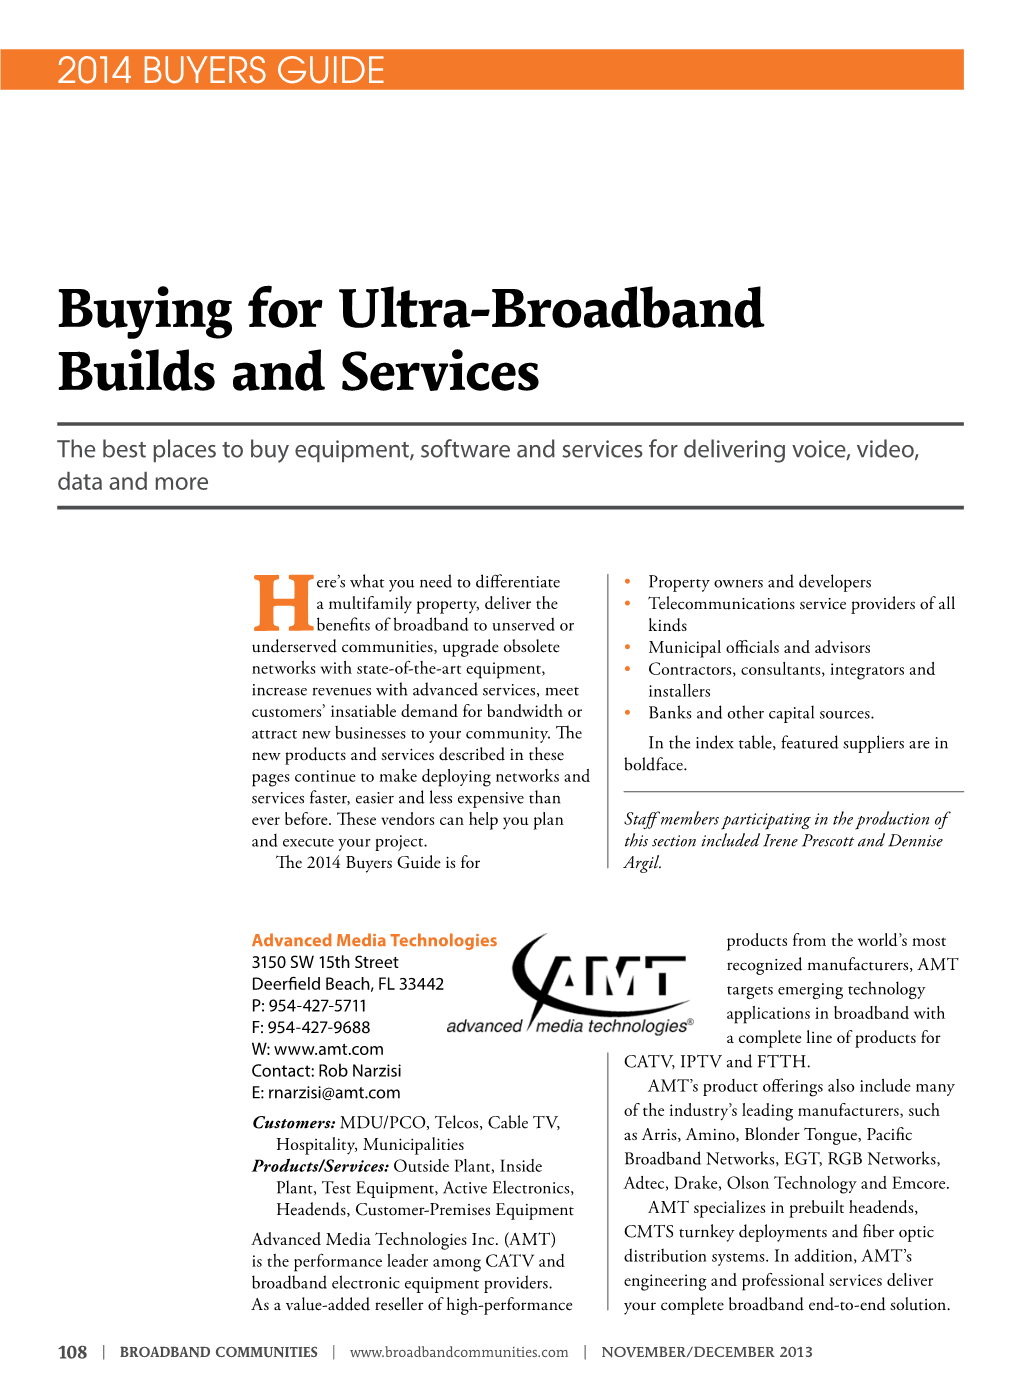 Buying for Ultra-Broadband Builds and Services